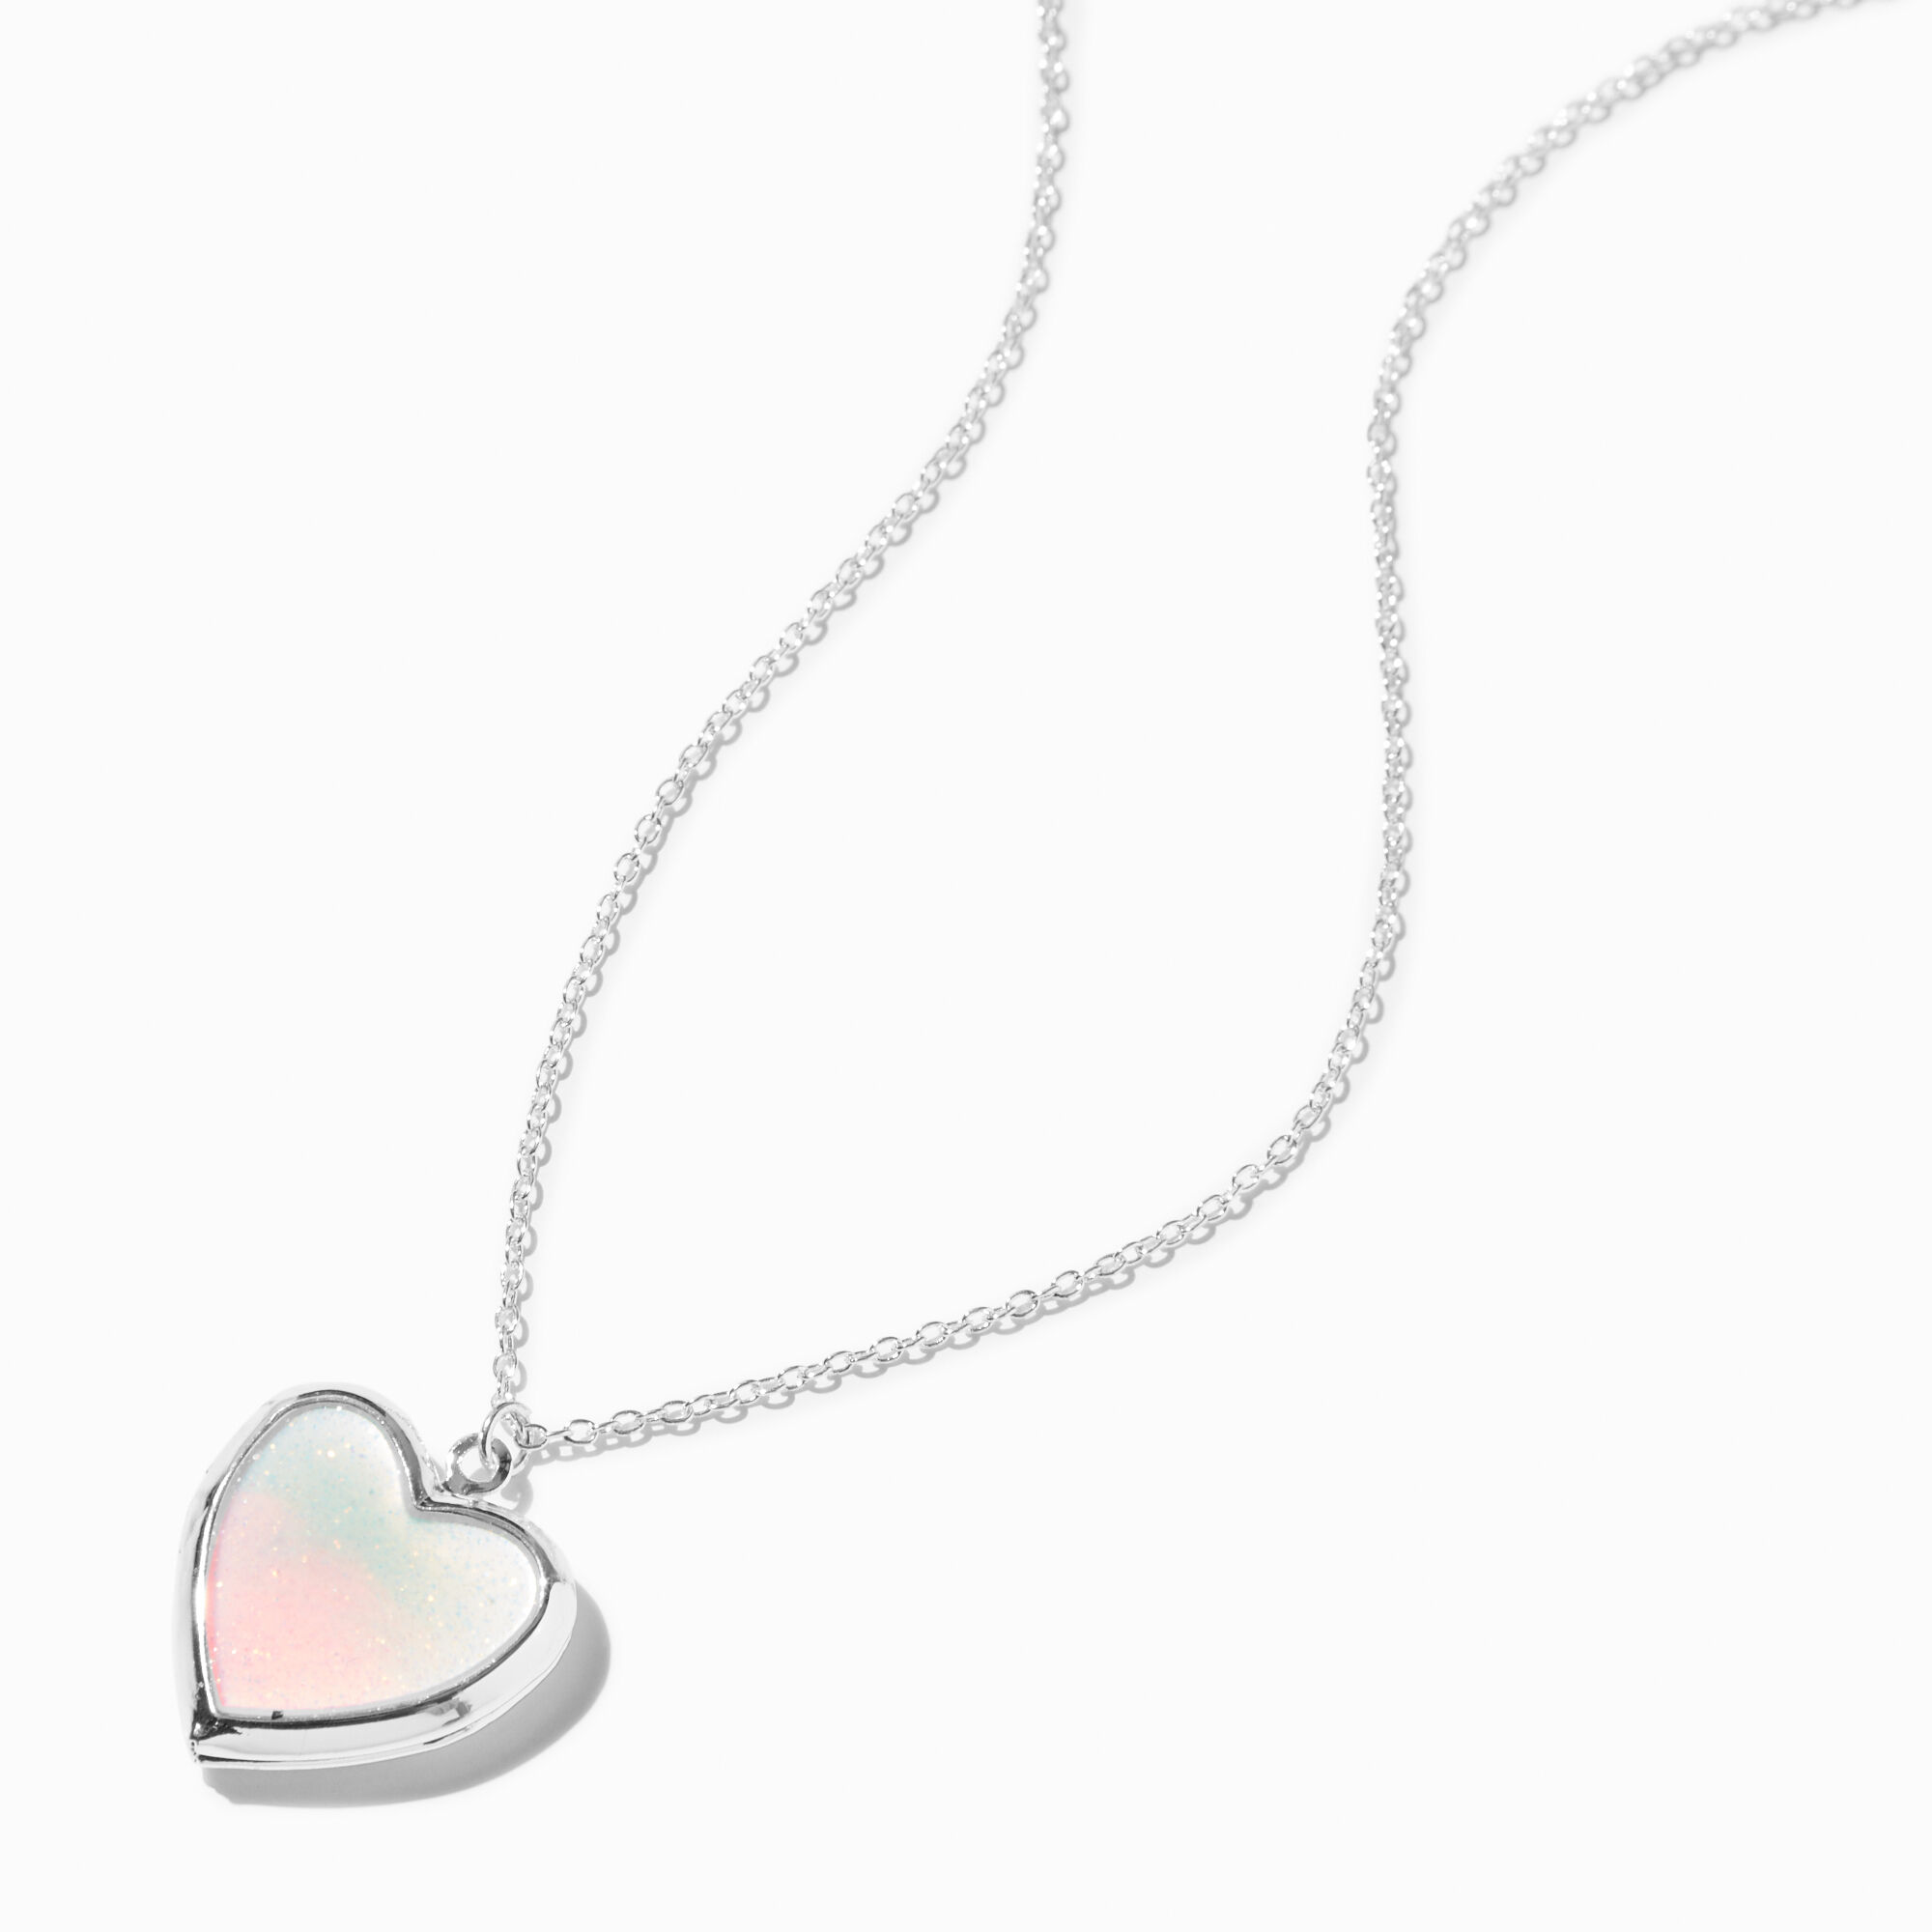 silver heart locket products for sale | eBay